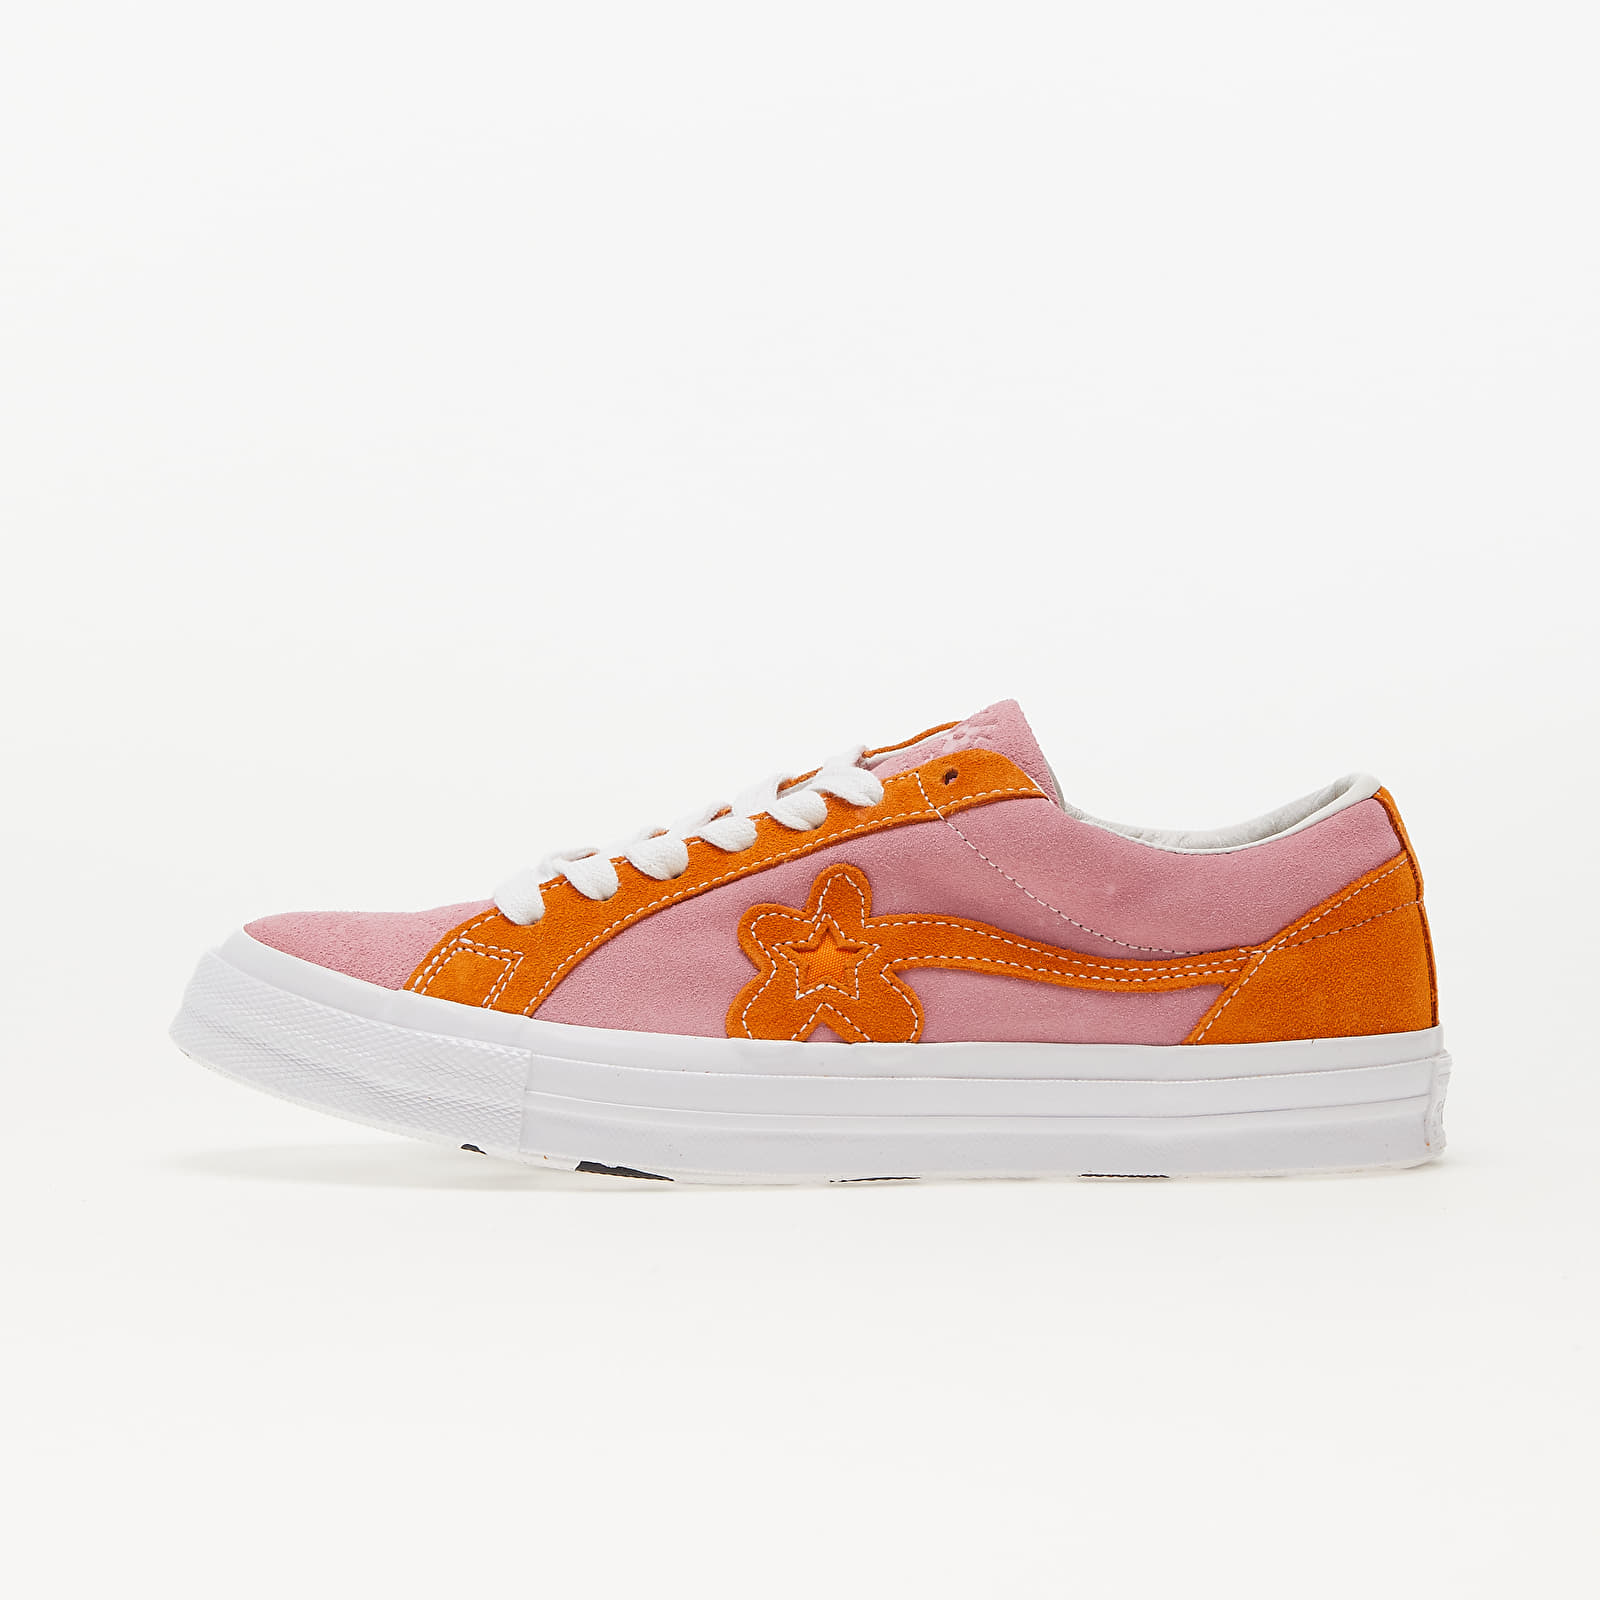 Men's shoes Converse x Tyler The Creator One Star Golf Le Fleur OX Candy Pink/ Orange Peel/ White